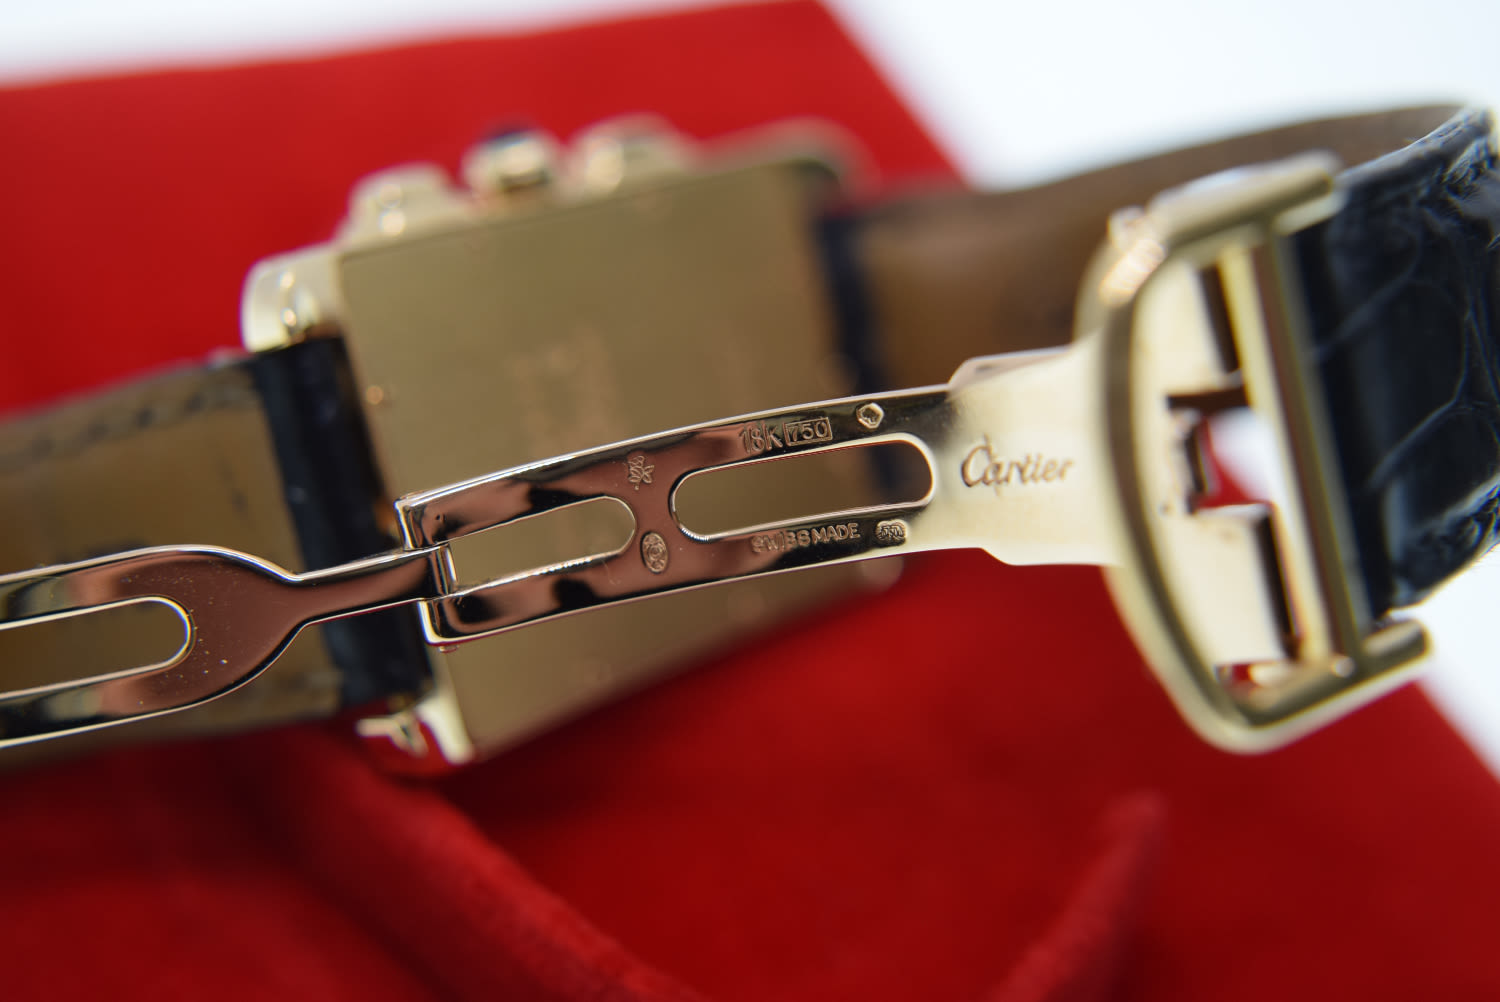 18K GOLD CARTIER TANK AMERICAINE REF. 1730 ON BLACK LEATHER WITH CARTIER SIGNED CLASP - Image 5 of 9